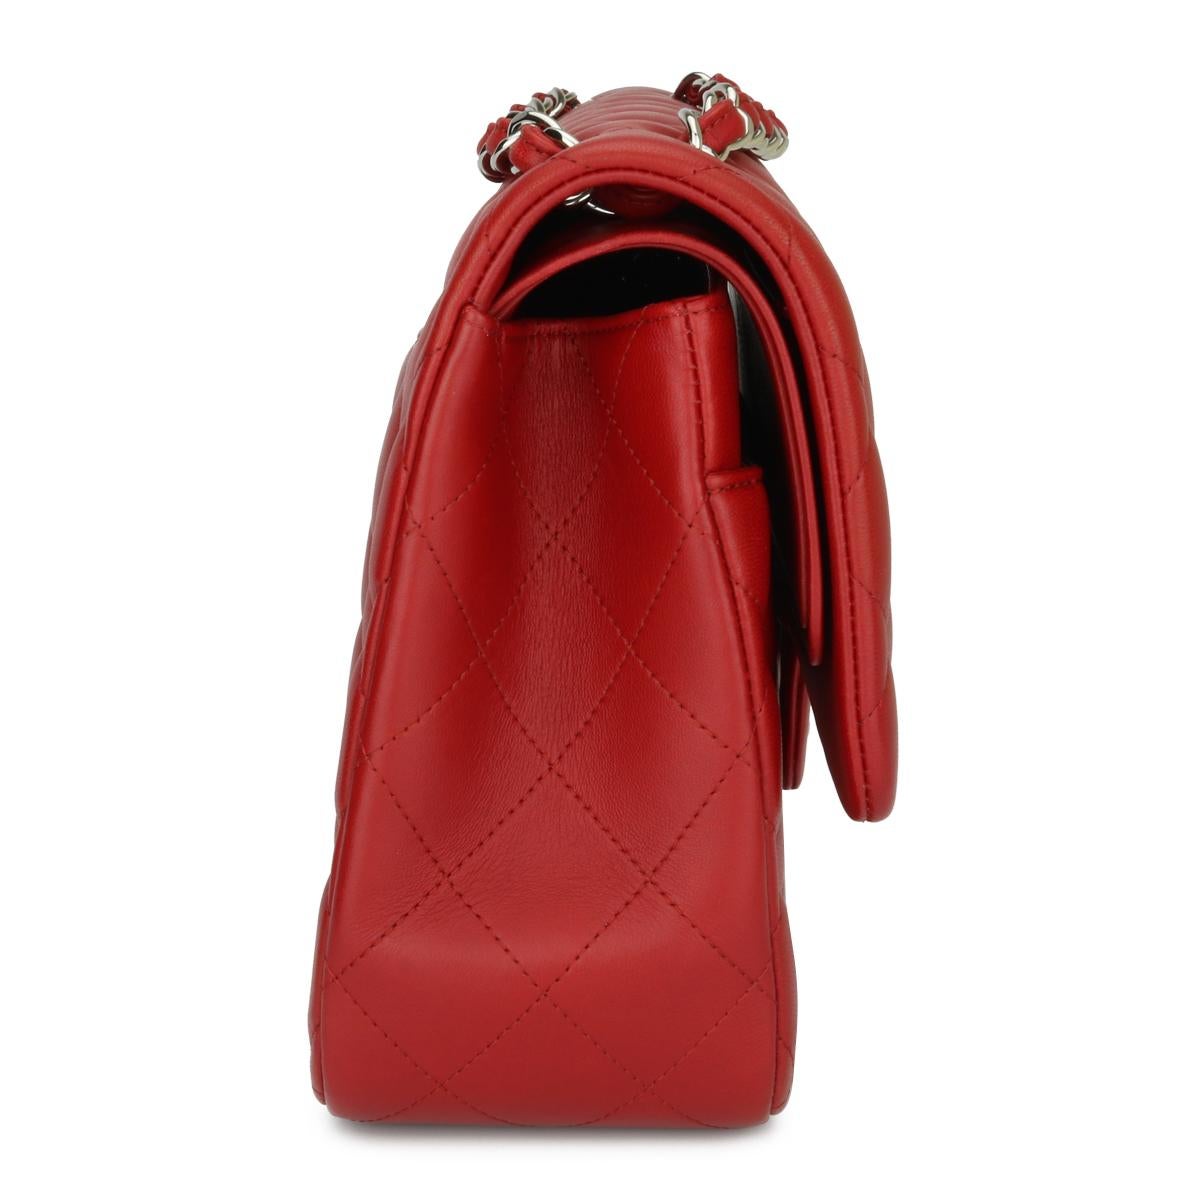 red chanel double flap bag